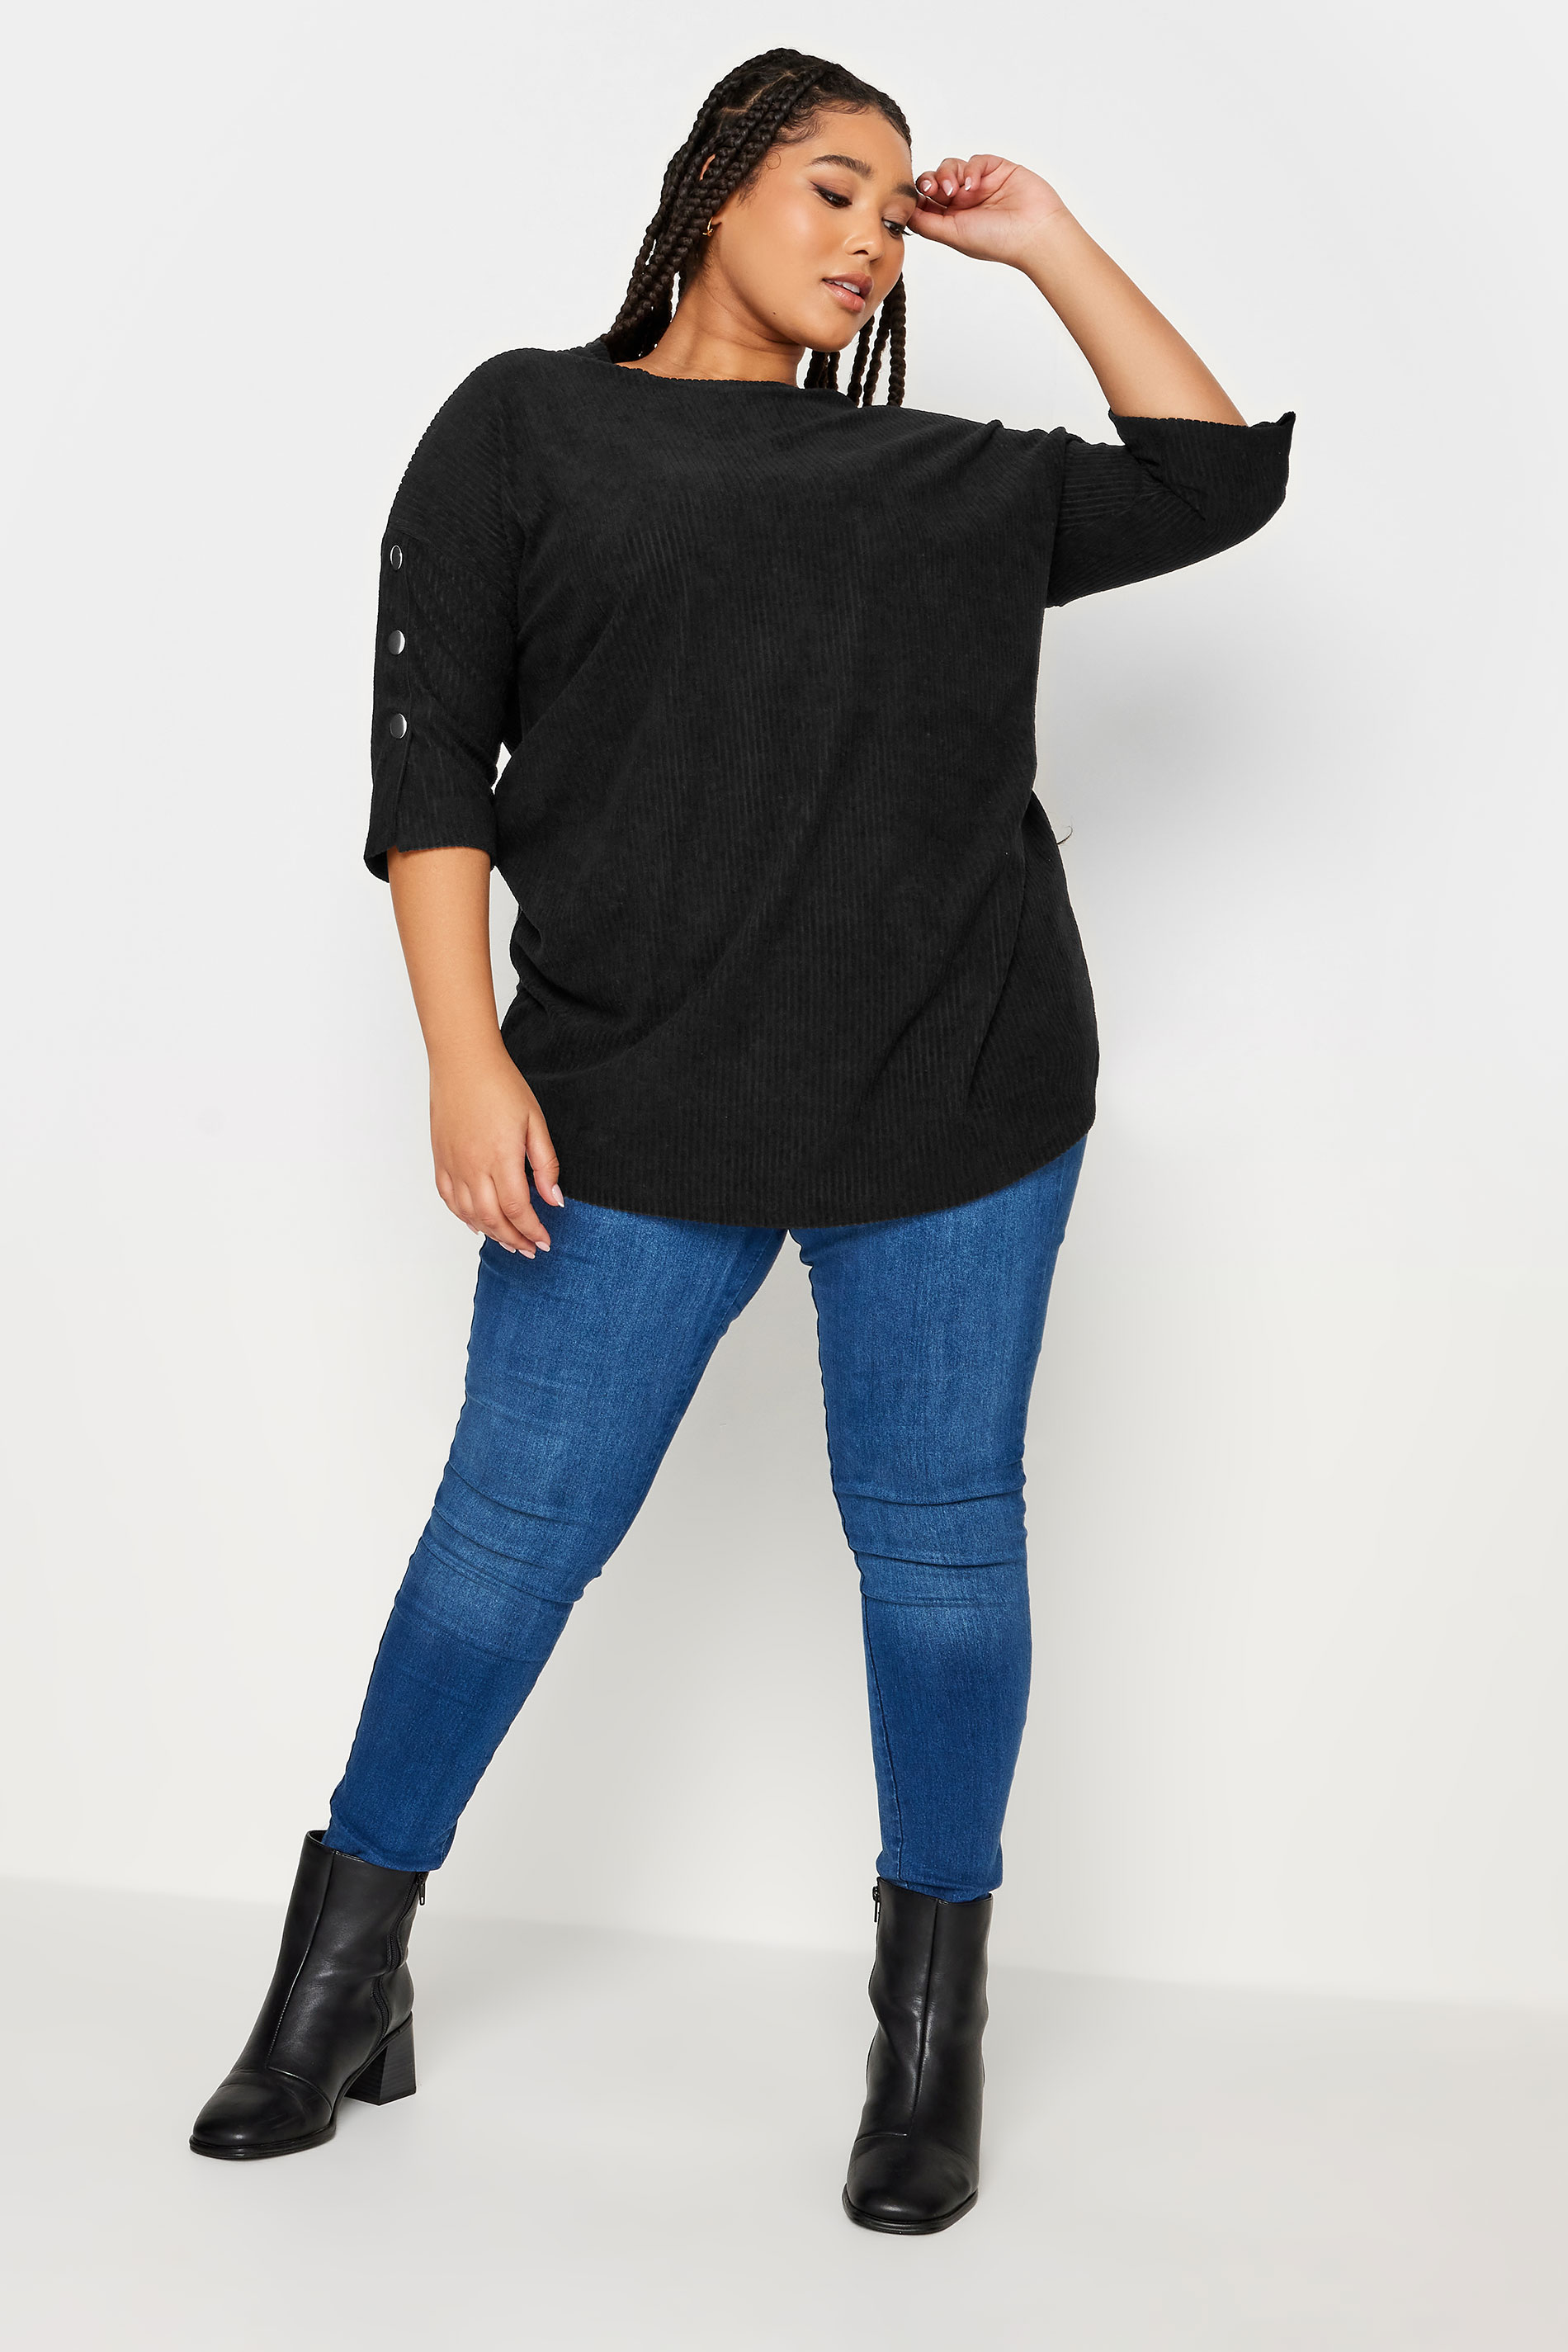 YOURS LUXURY Plus Size Curve Black Soft Touch Button Top | Yours Clothing 2